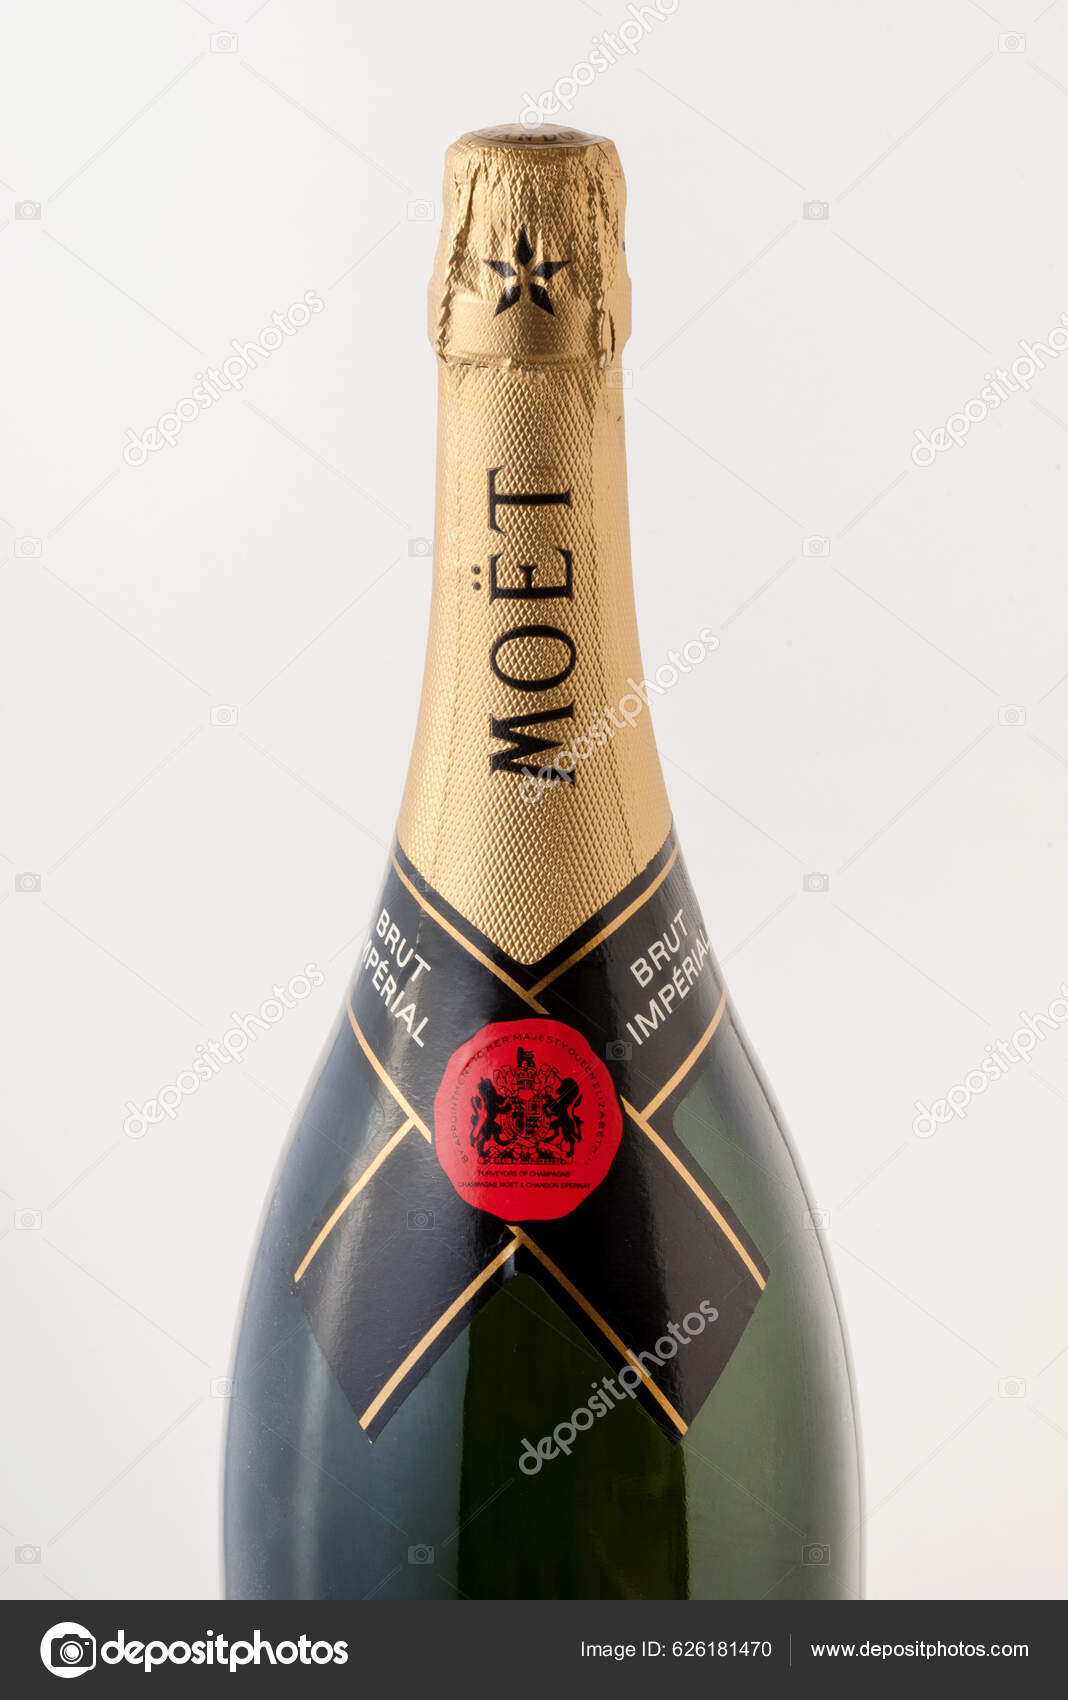 Closeup Sealed Bottle Expensive Moet Chandon Champagne Placed Gray